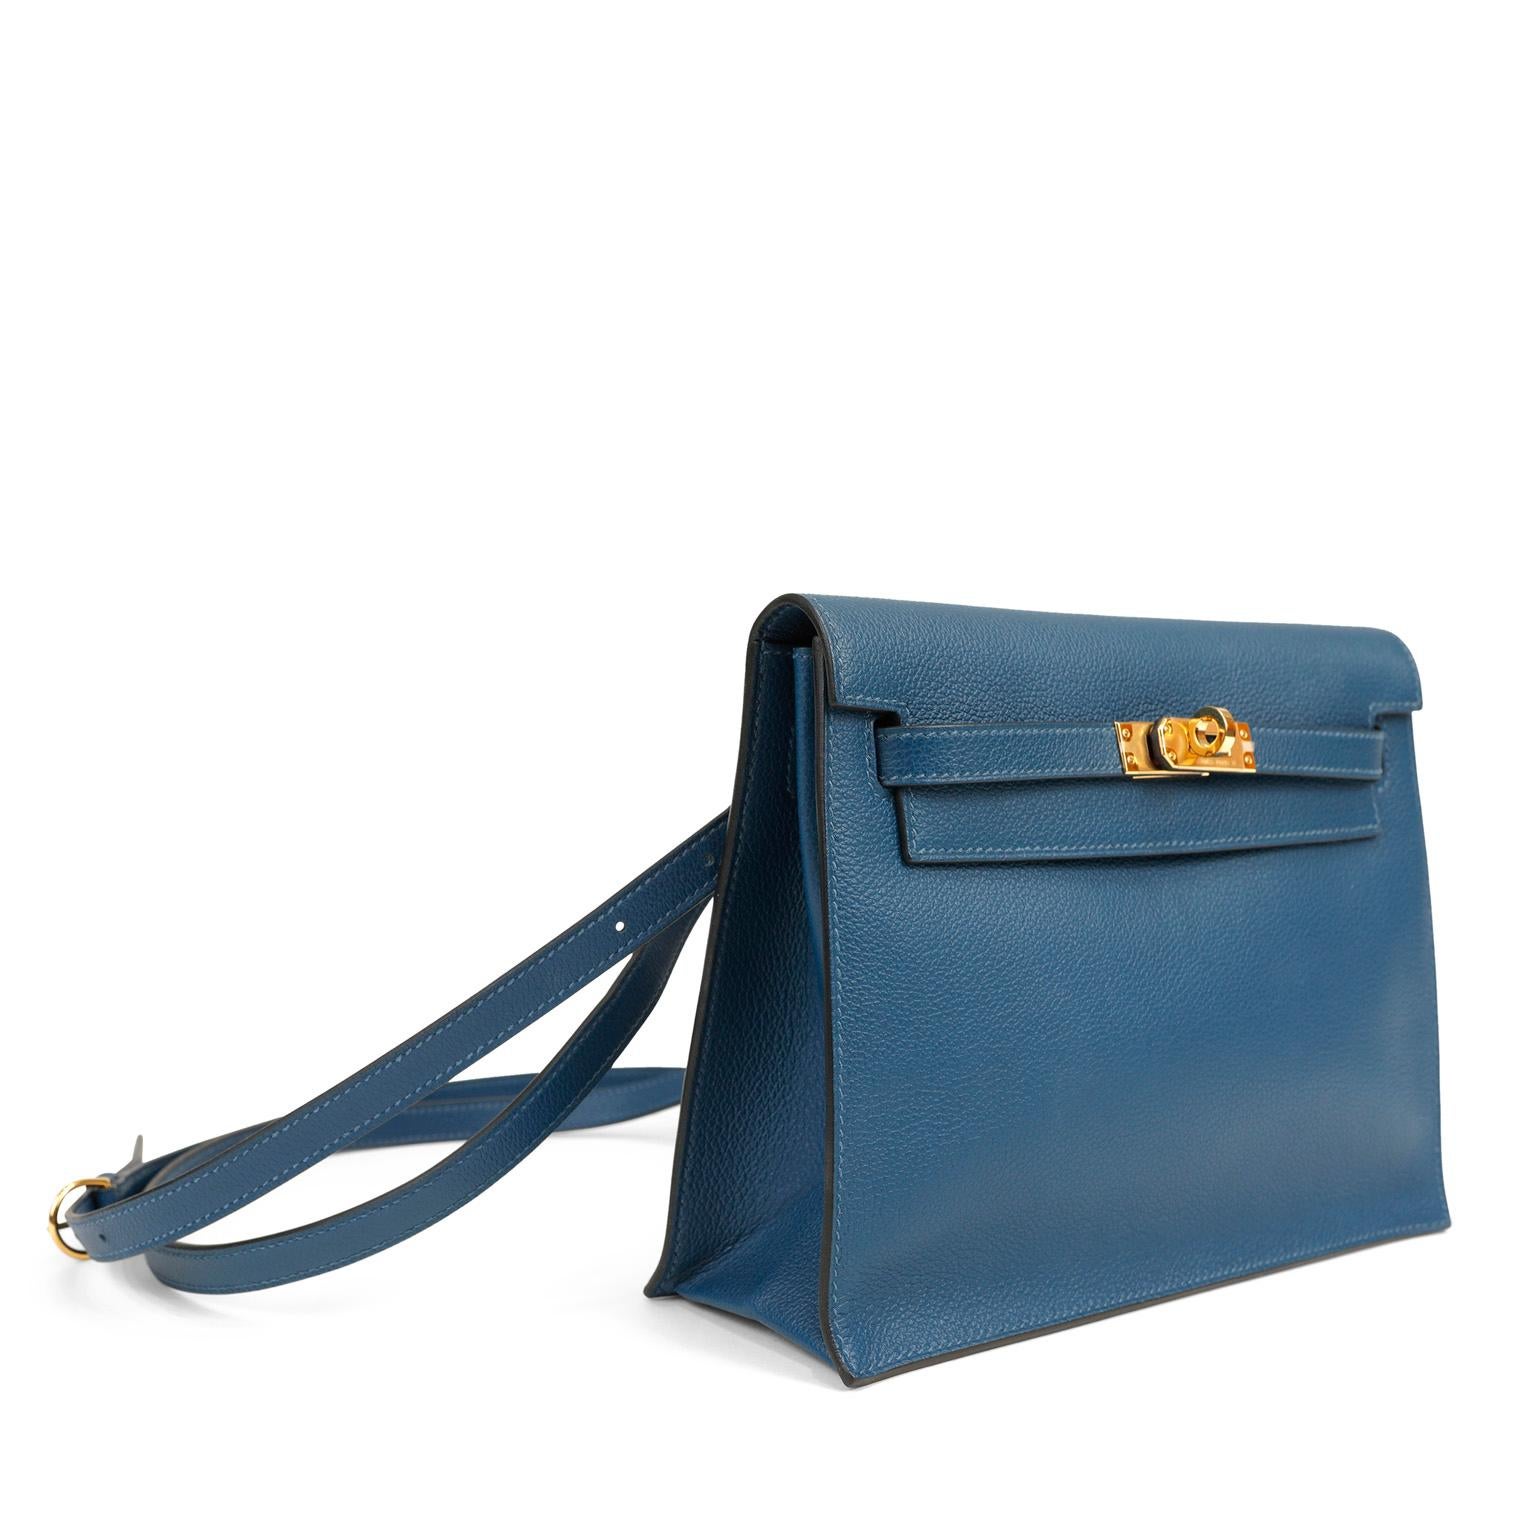 This authentic Hermès Teal Blue Evercolor Kelly Danse II is in pristine unworn condition with the protective plastic intact on the gold hardware.  Extremely versatile, The Kelly Danse II may be carried on the shoulder, across the body or as a chic